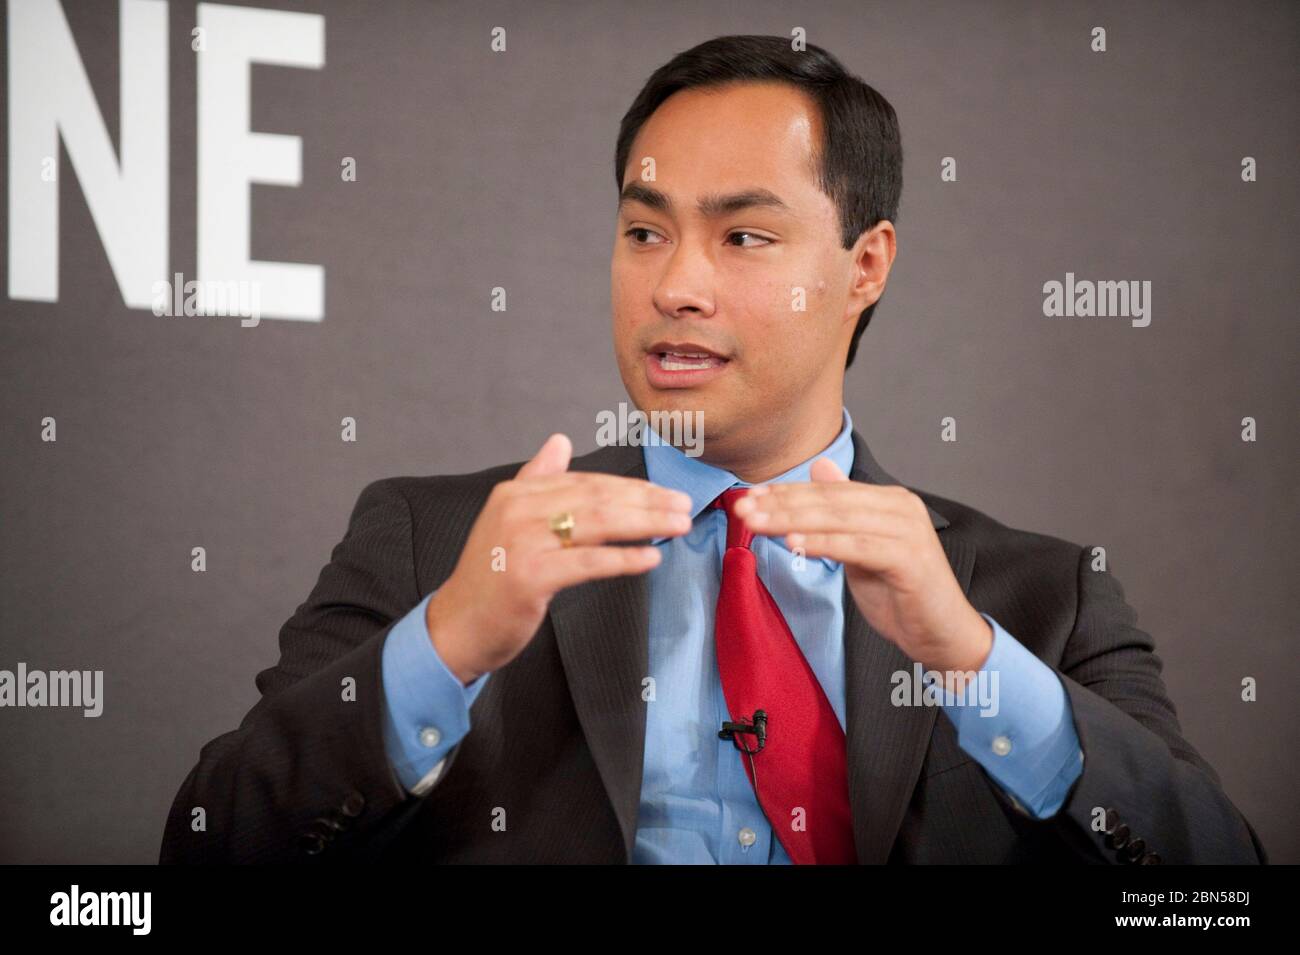 Austin Texas USA, December 1 2011: Hispanic politician Joaquin Castro of San Antonio speaks at a Texas Tribune event. the Stanford and Harvard educated Castro, 37, has announced his intentions to run for United State Senate in 2012. His twin brother, Julian, is the mayor of San Antonio. ©Bob Daemmrich Stock Photo